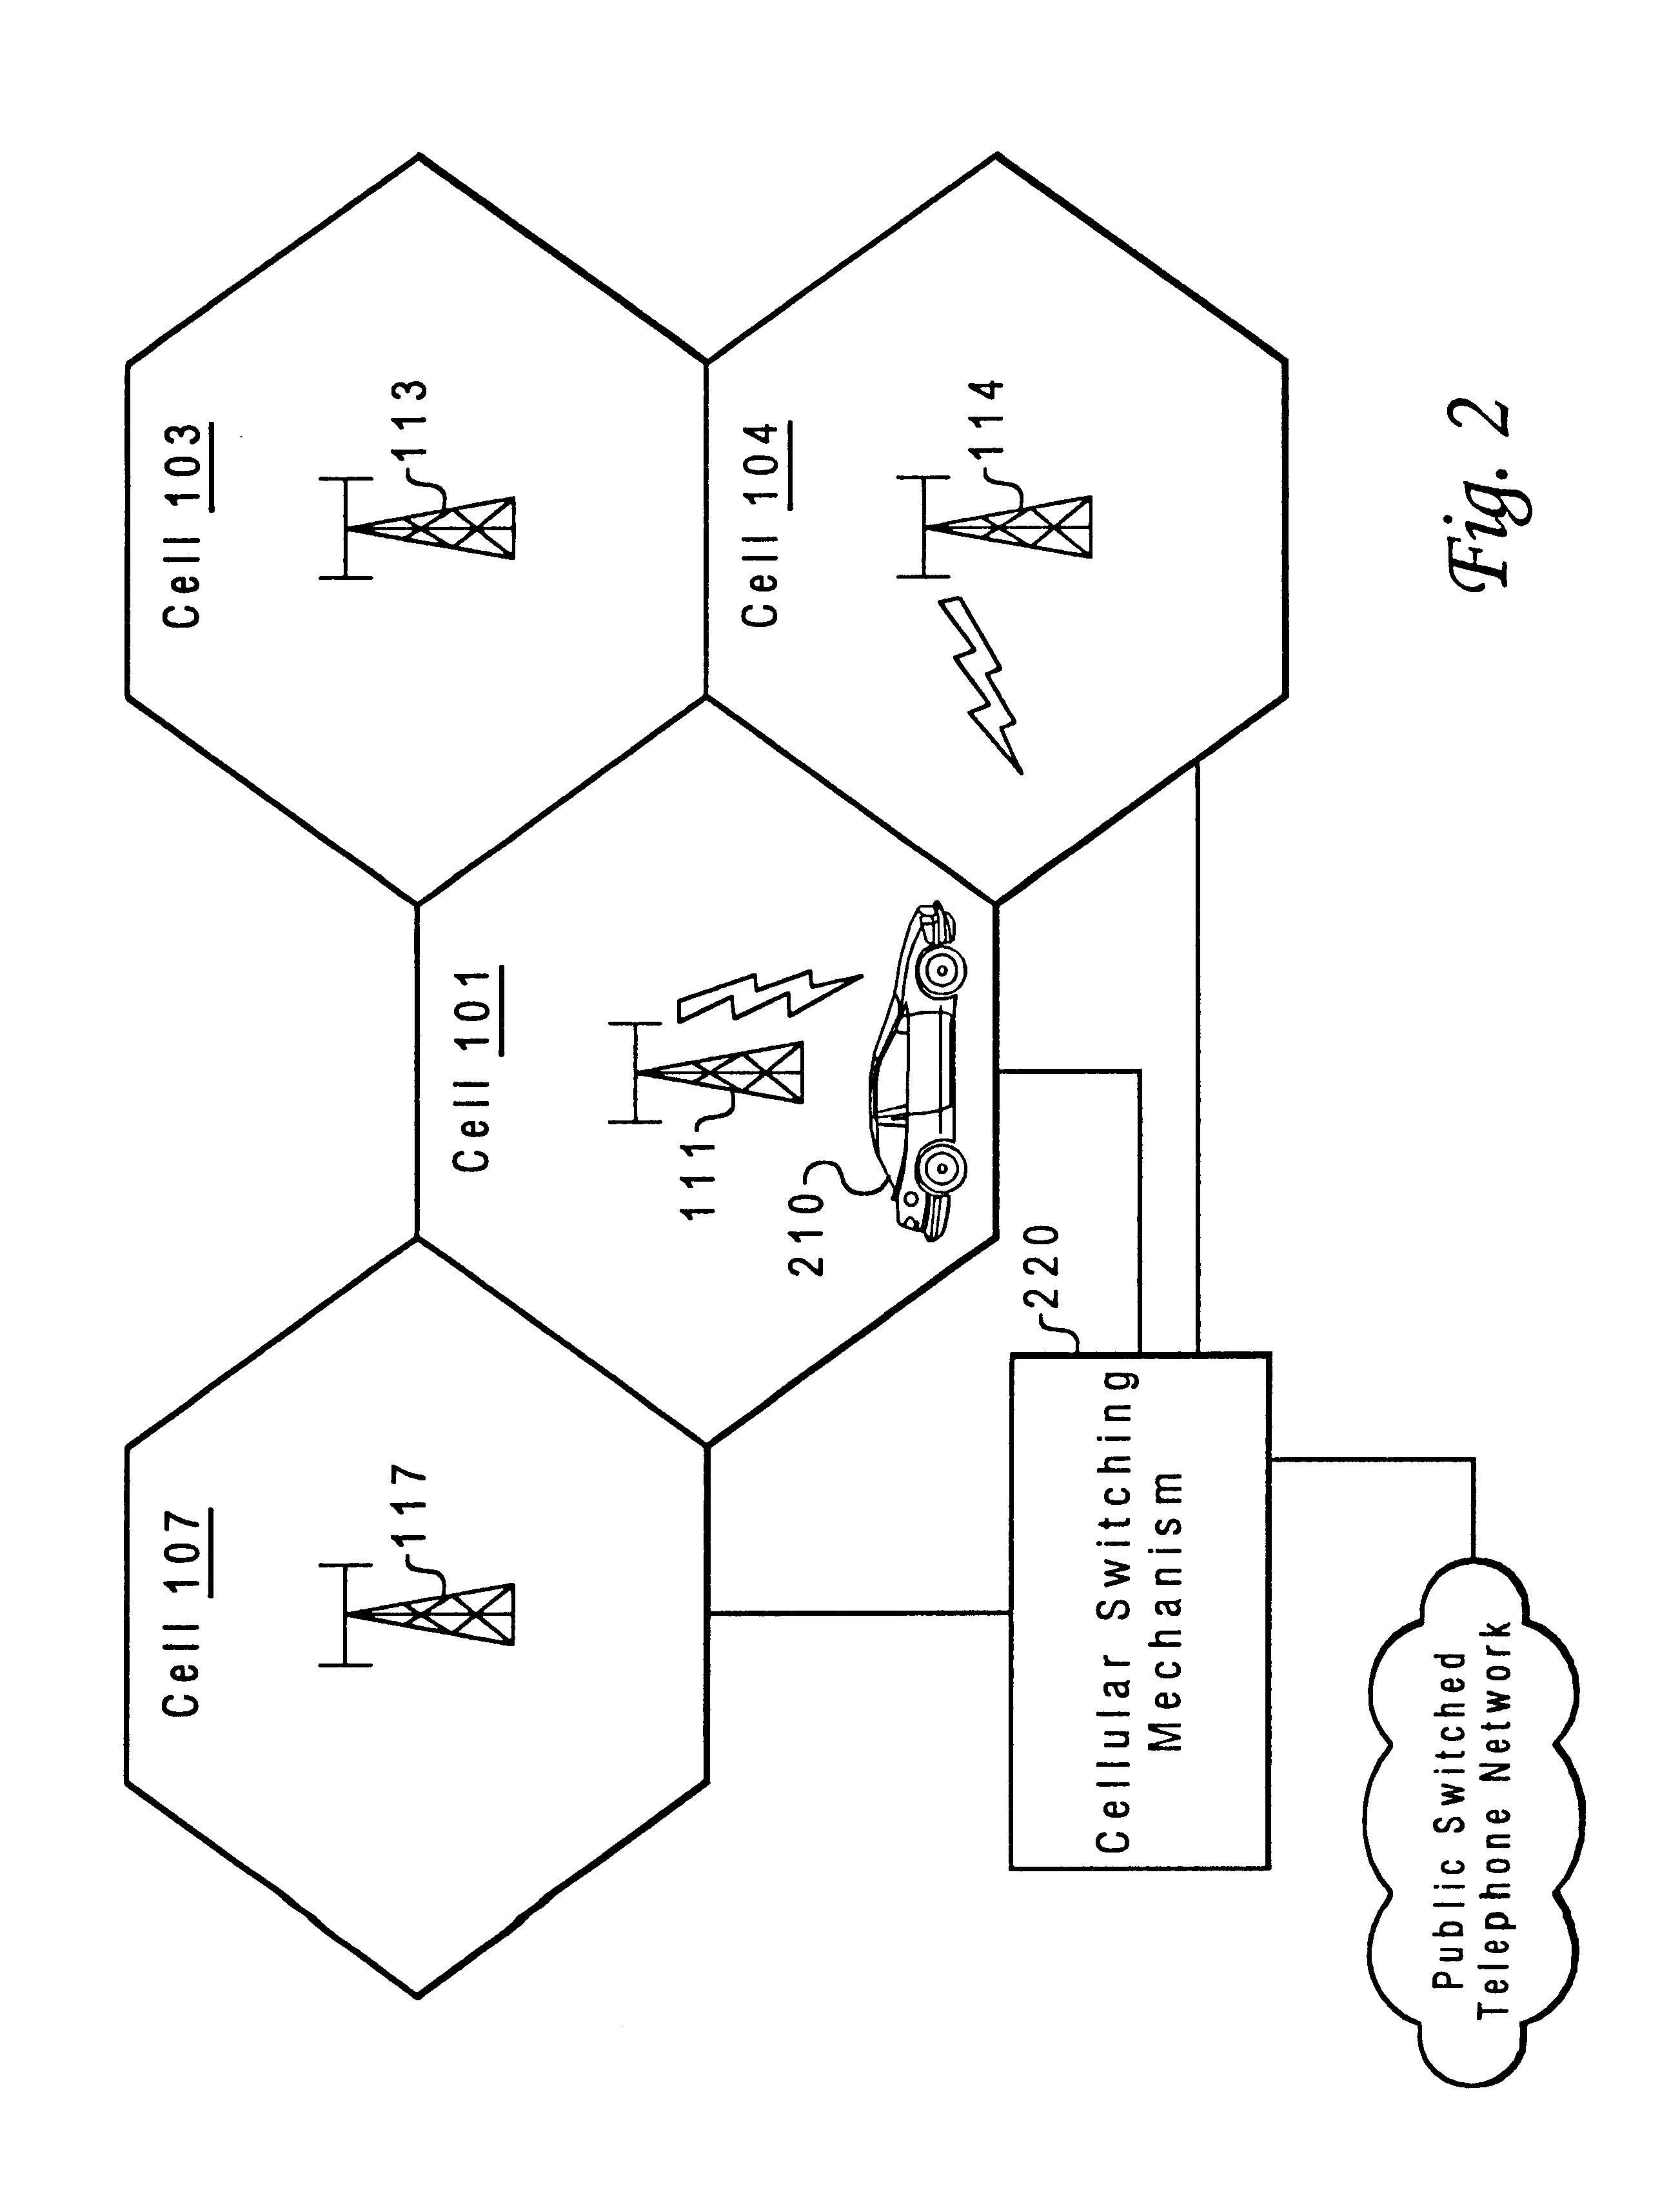 Method of integrating handoff queuing with adaptive handoff reserve channels